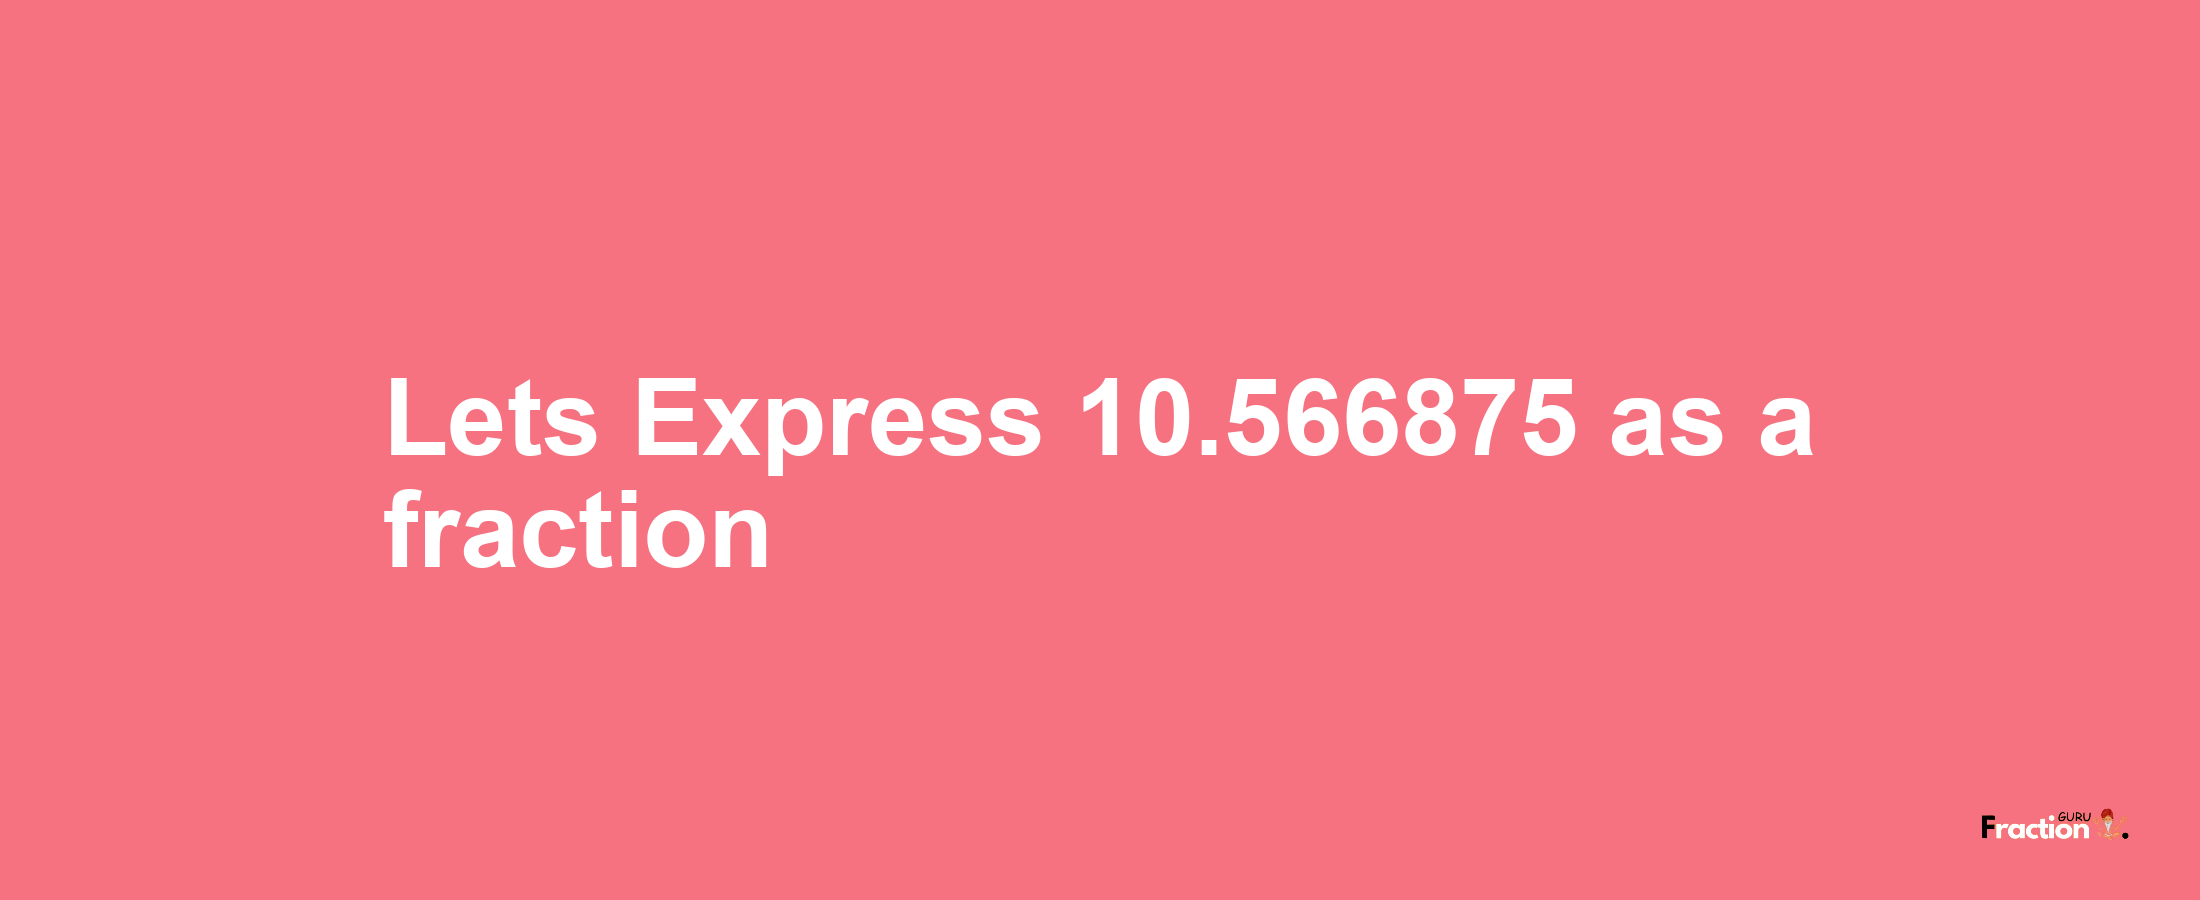 Lets Express 10.566875 as afraction